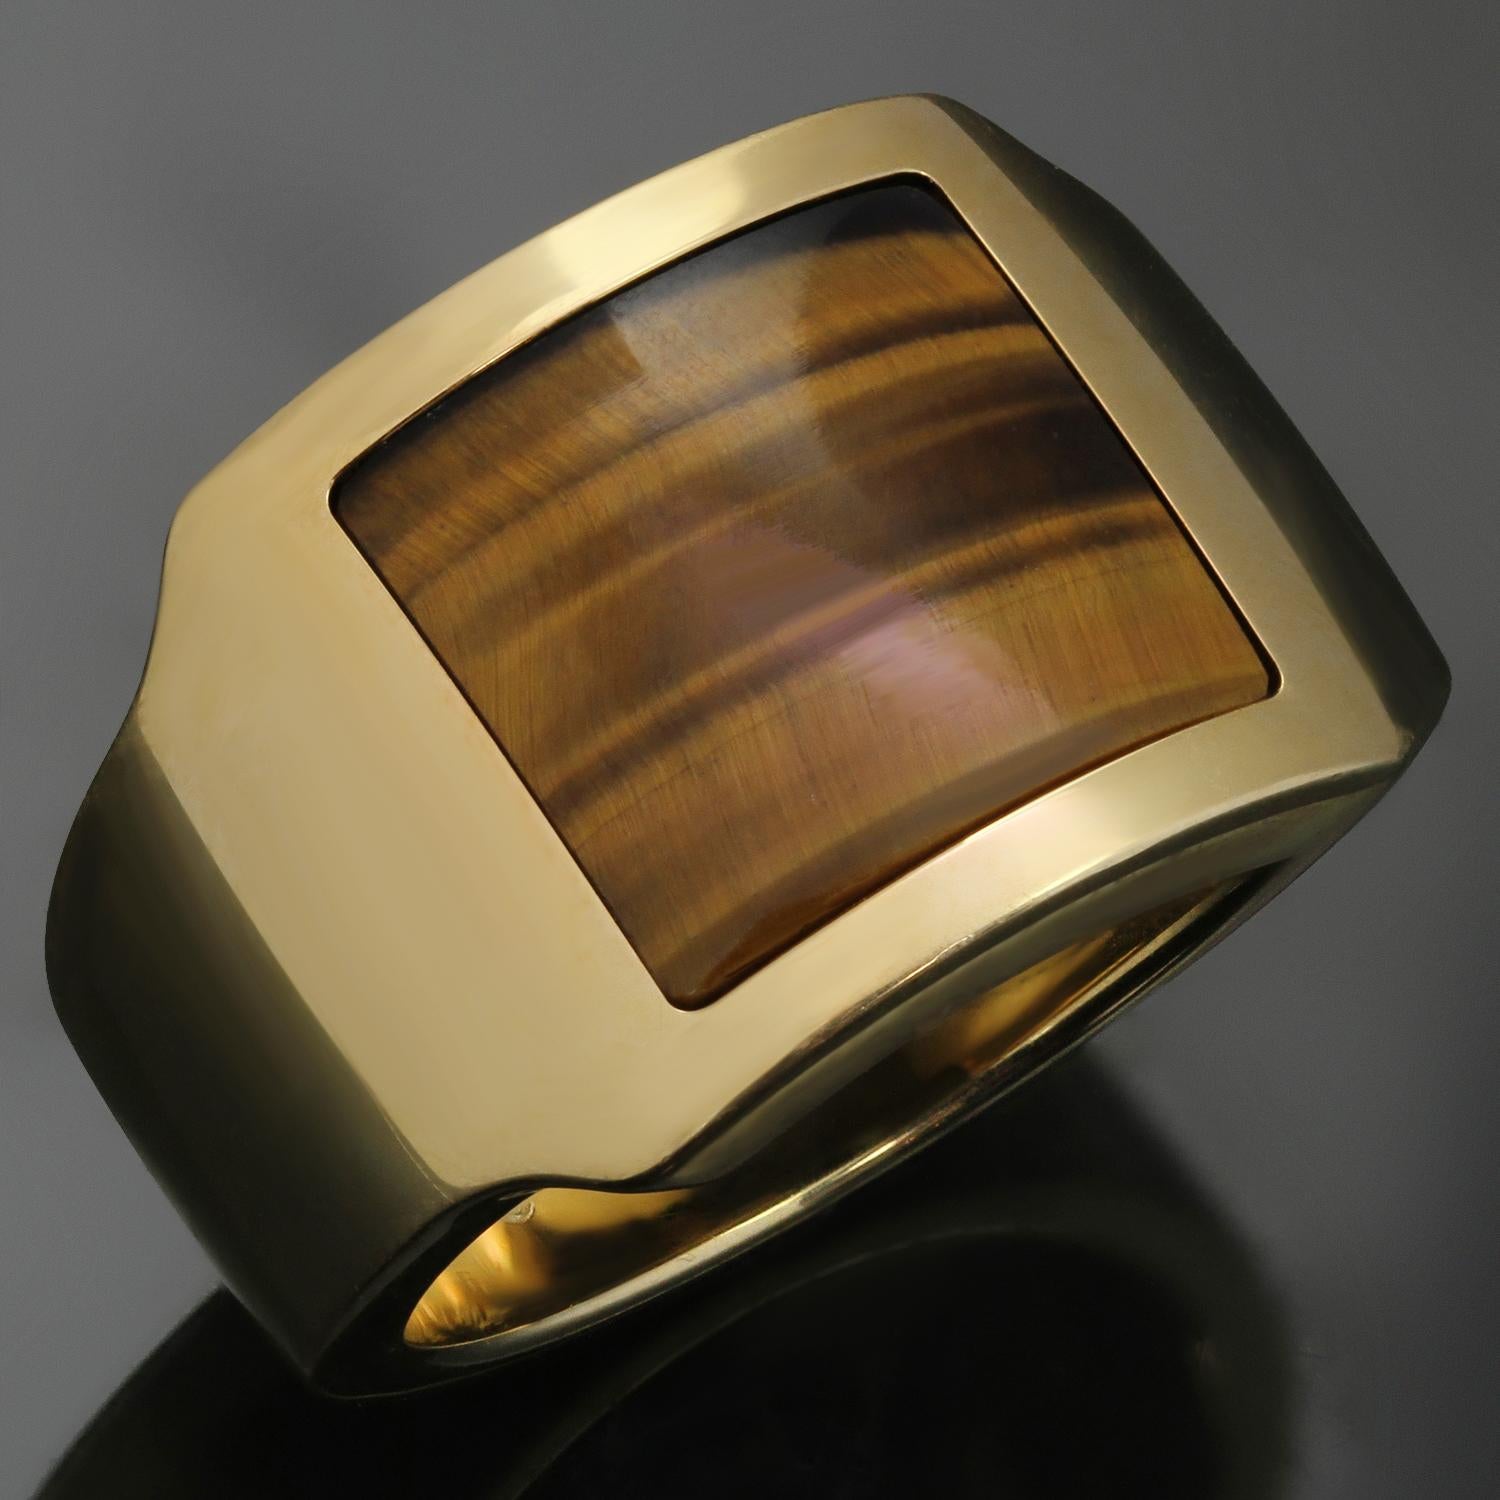 This rare Cartier men's ring from the classic Santos collection is crafted in 18k yellow gold and set with square-cut tiger eye. Made in France circa 1990s. Measurements: 0.62